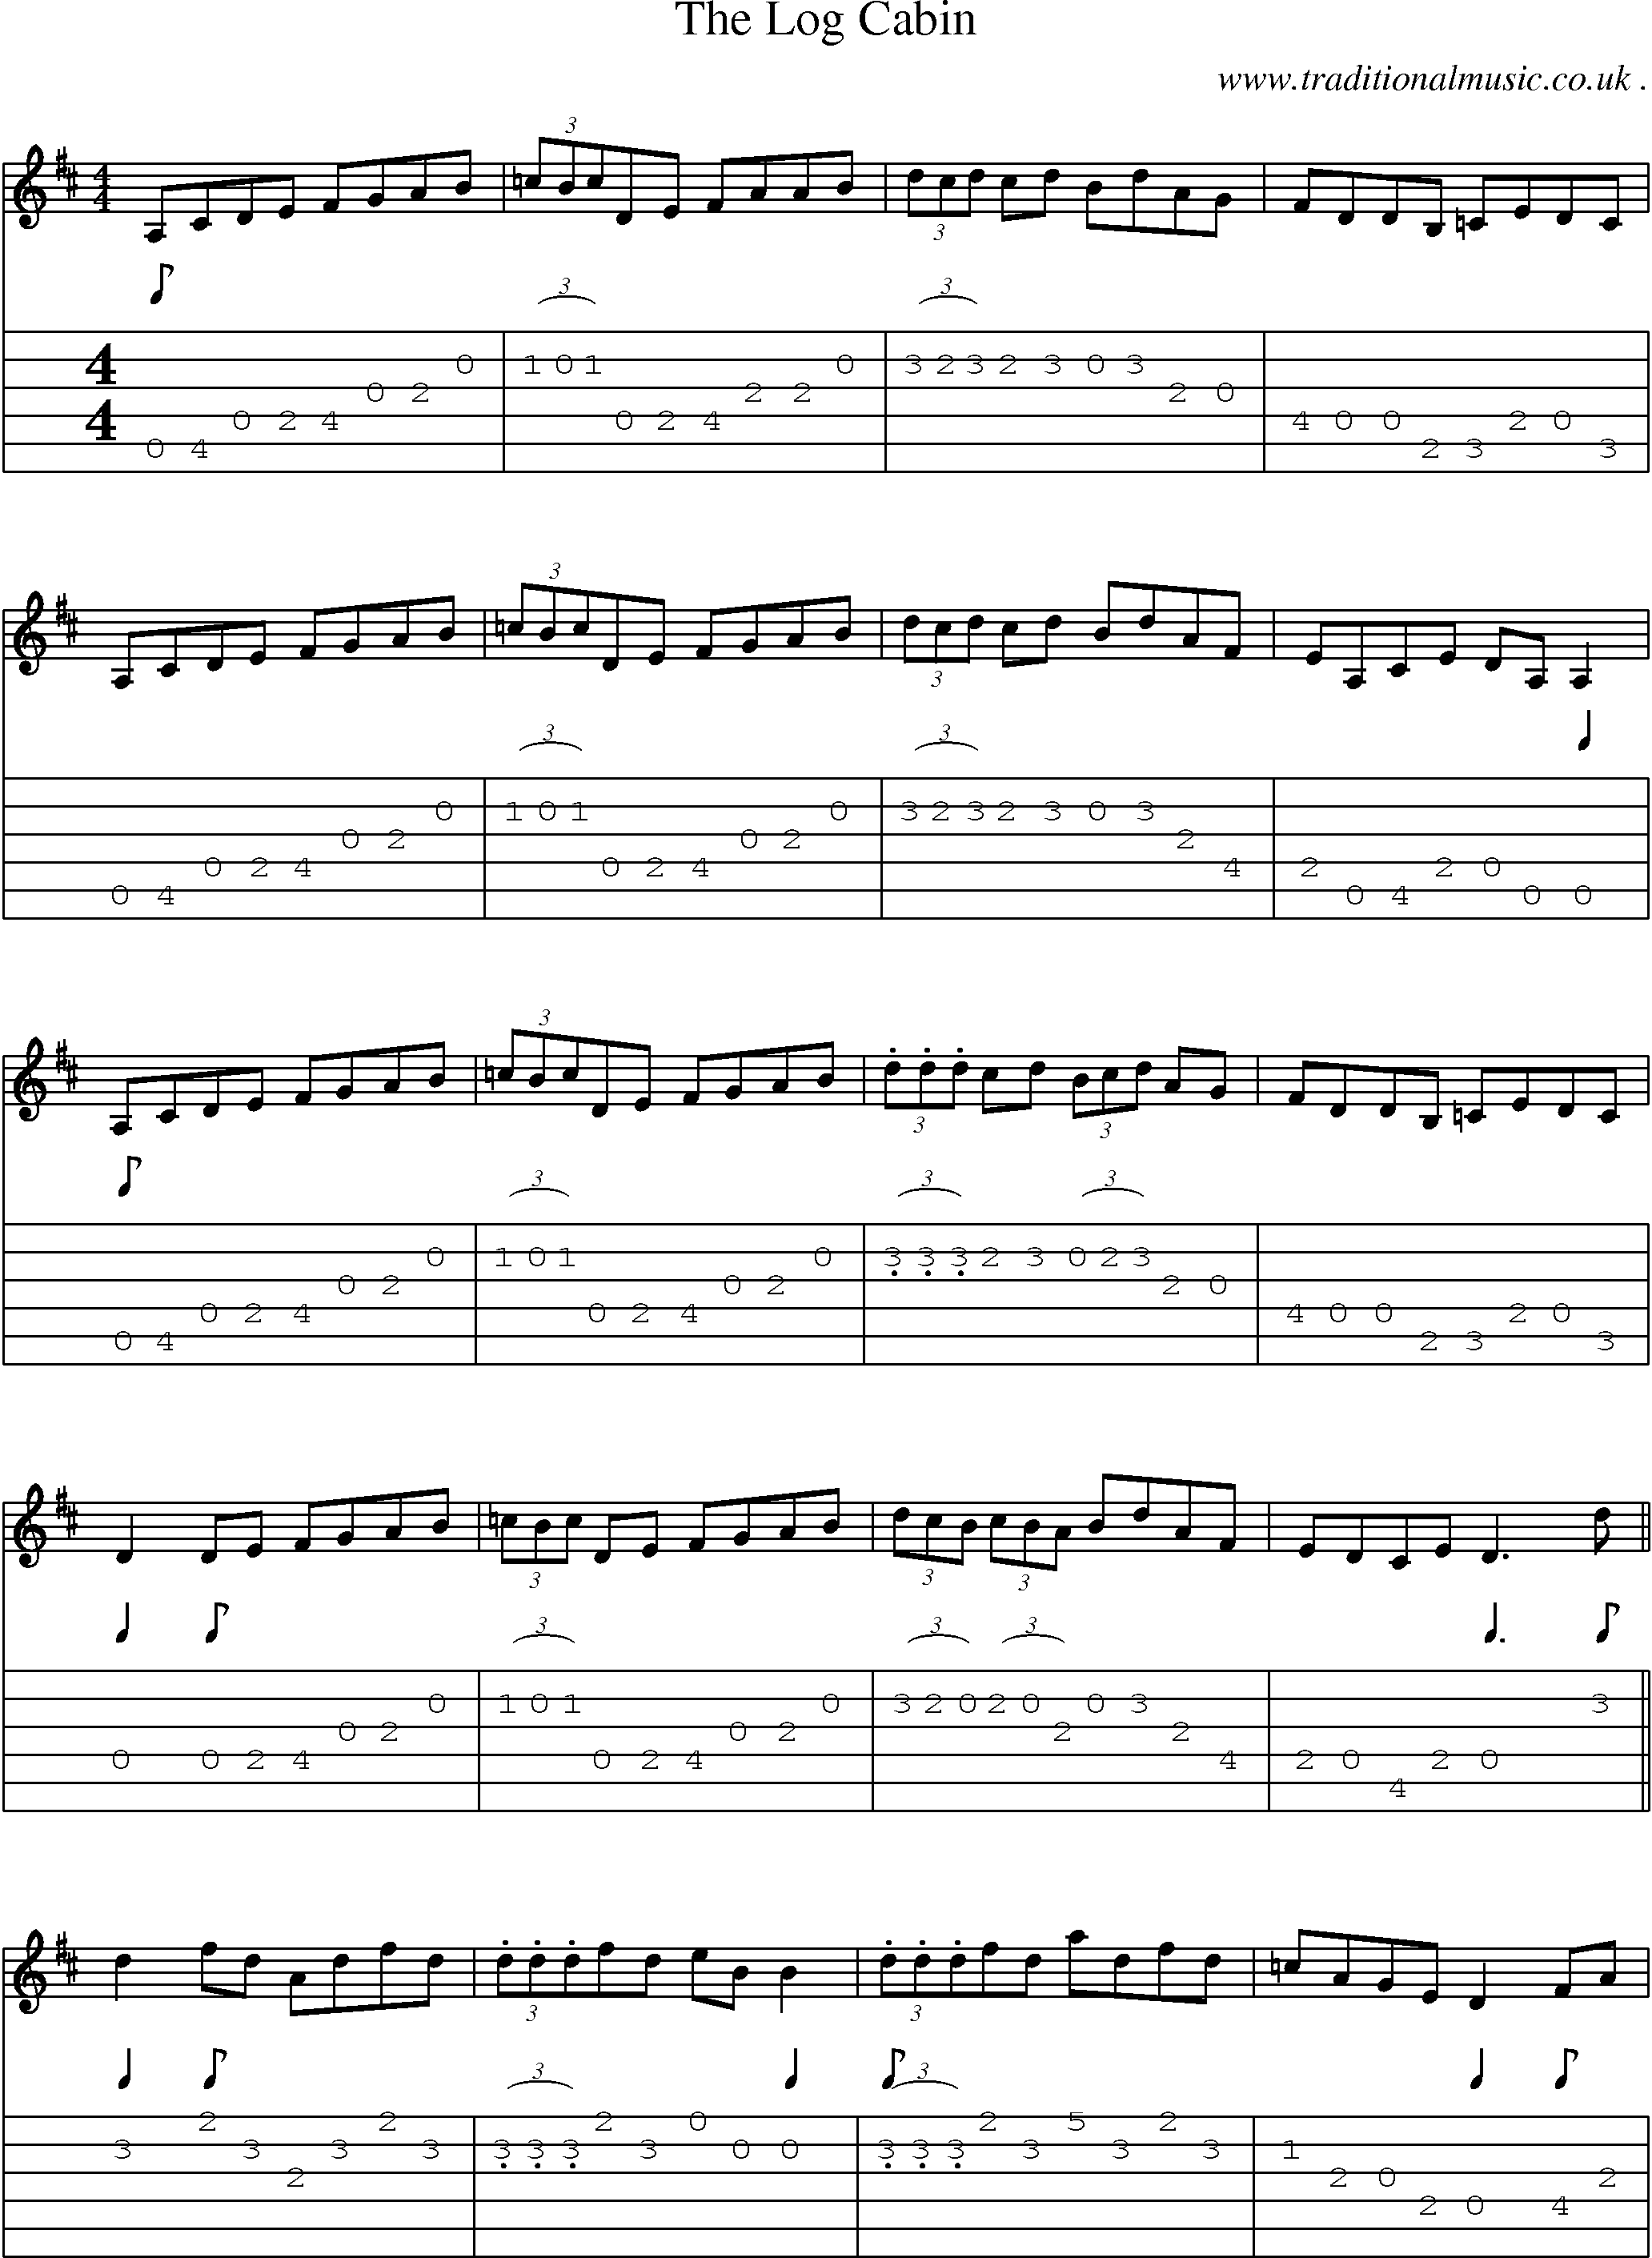 Sheet-Music and Guitar Tabs for The Log Cabin